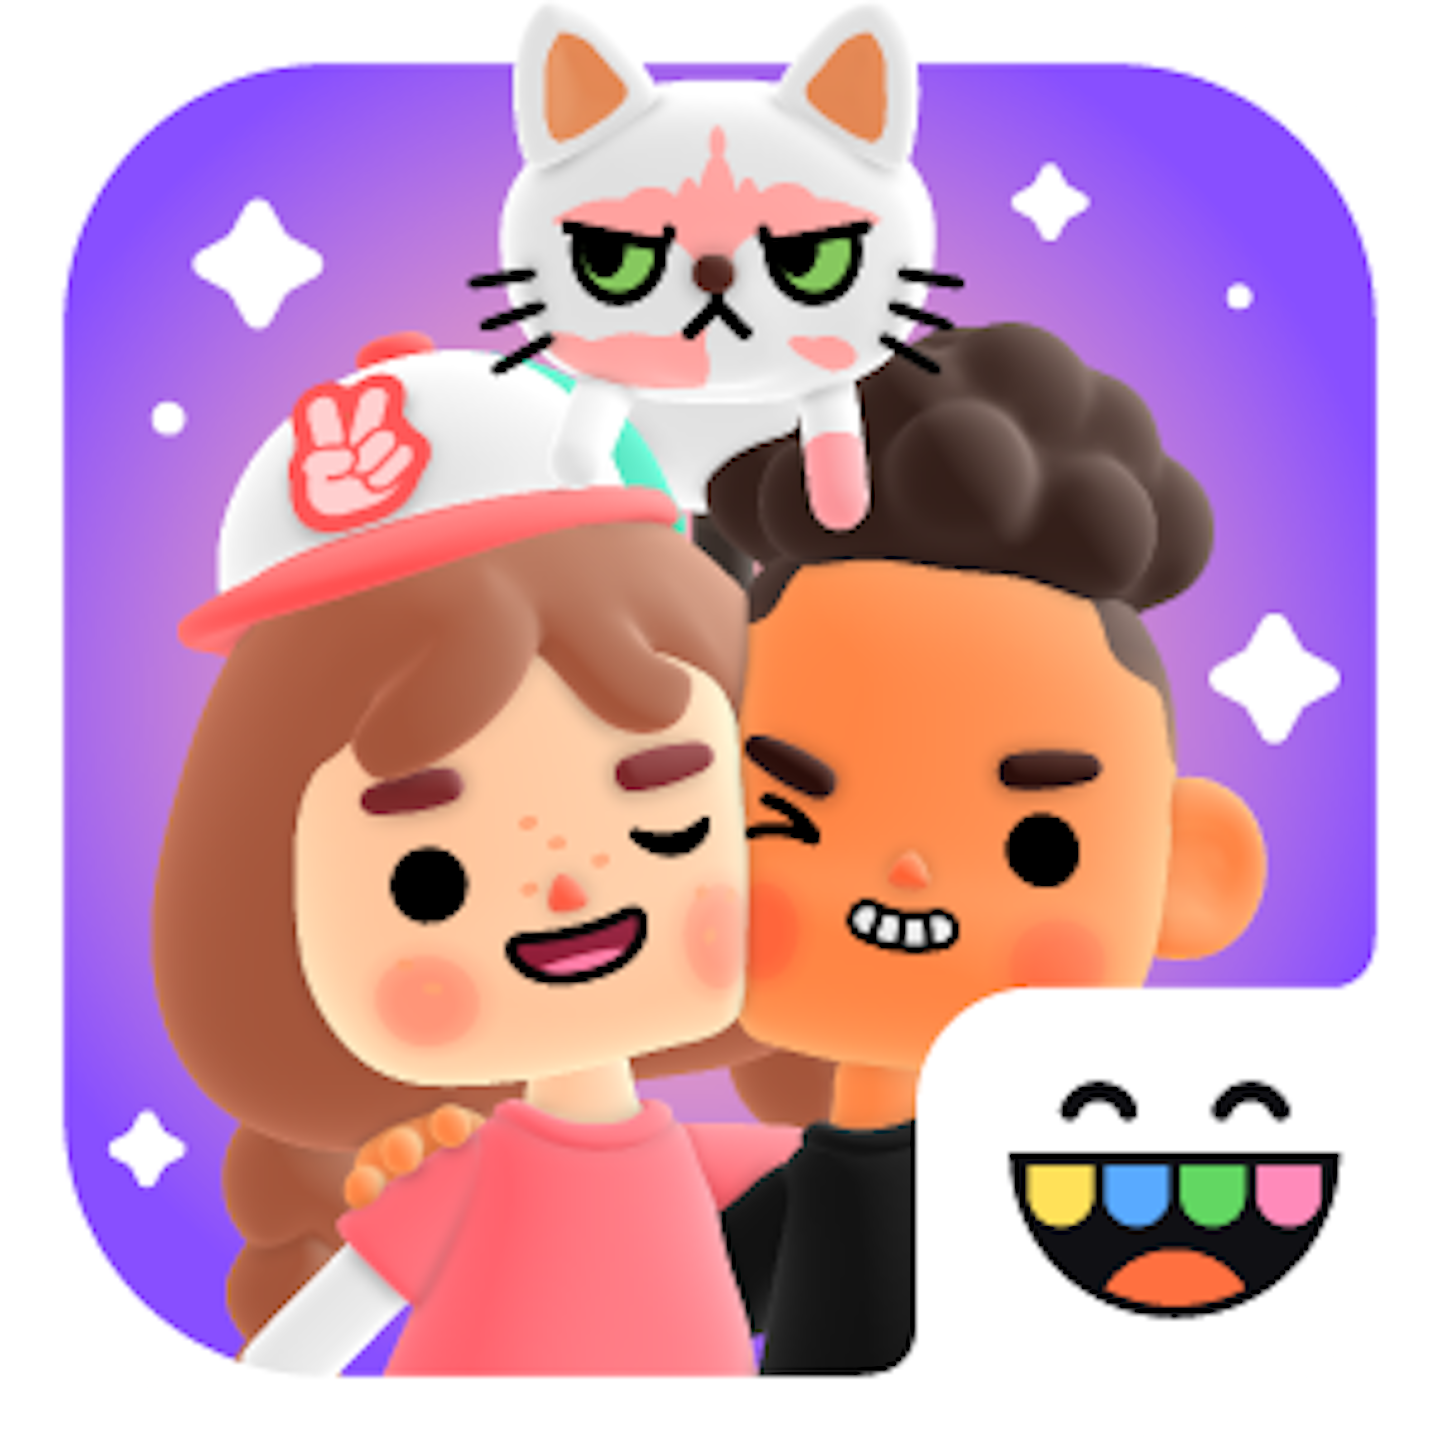 This is the app icon for the Toca Boca Days game